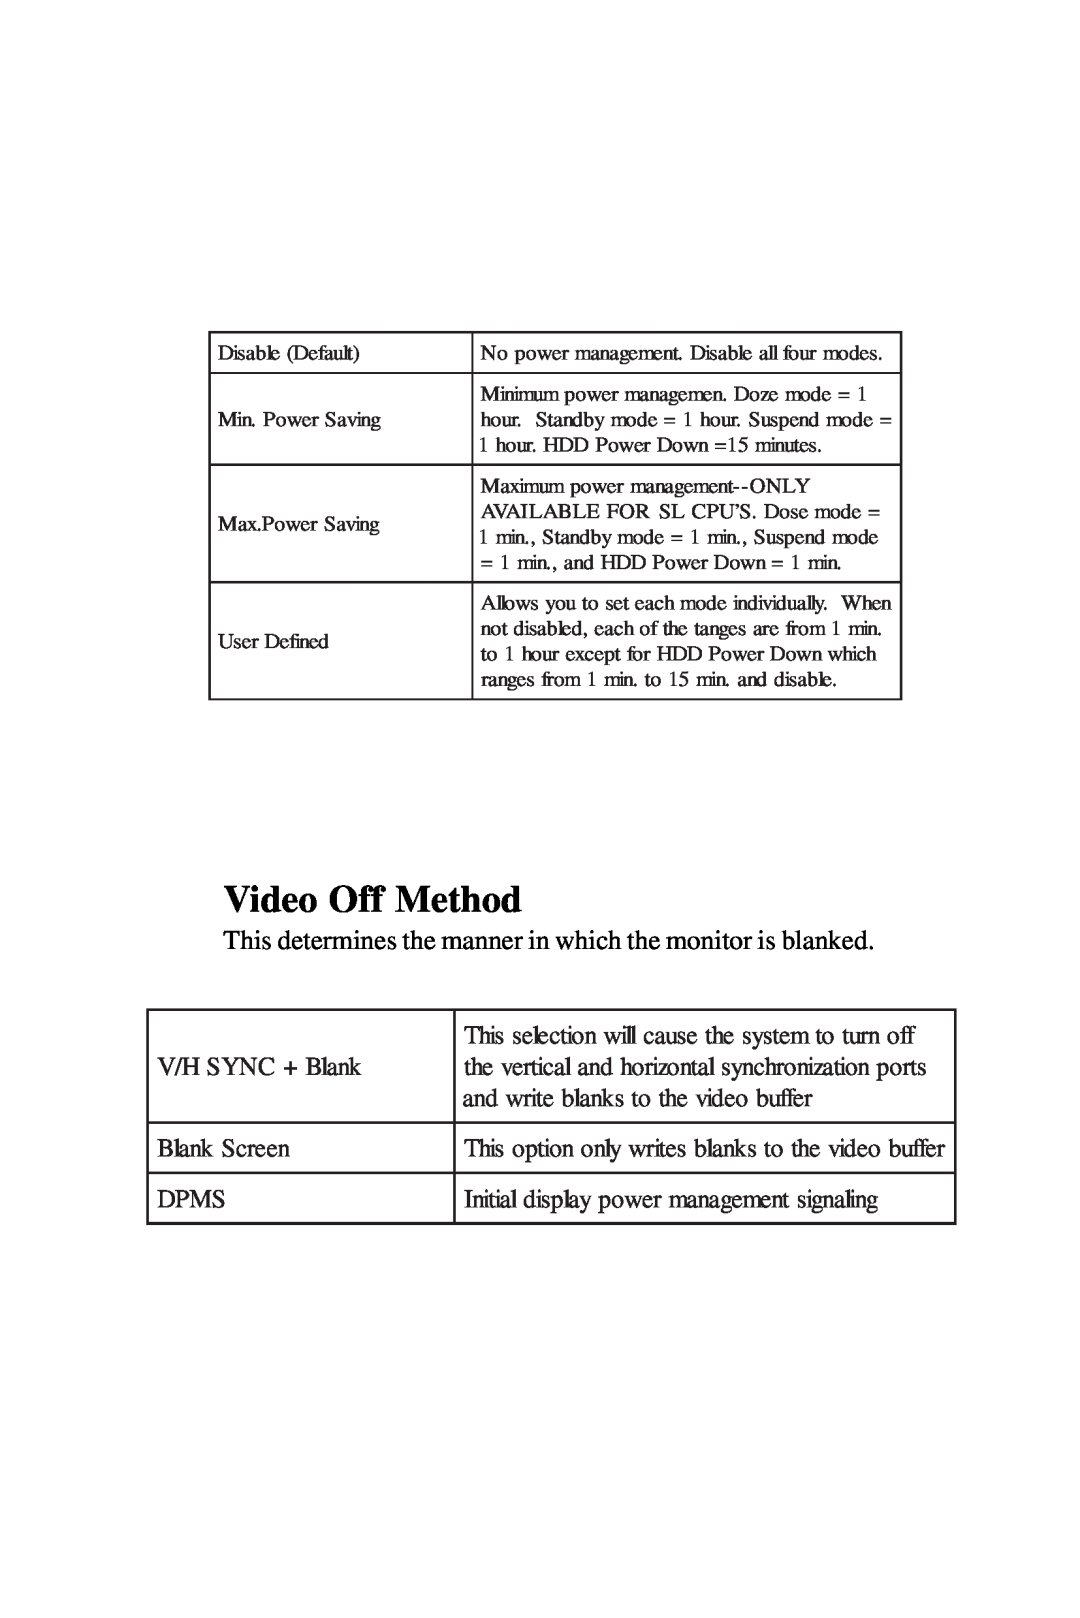 Intel PCM-6896 manual Video Off Method, This determines the manner in which the monitor is blanked, V/H SYNC + Blank, Dpms 